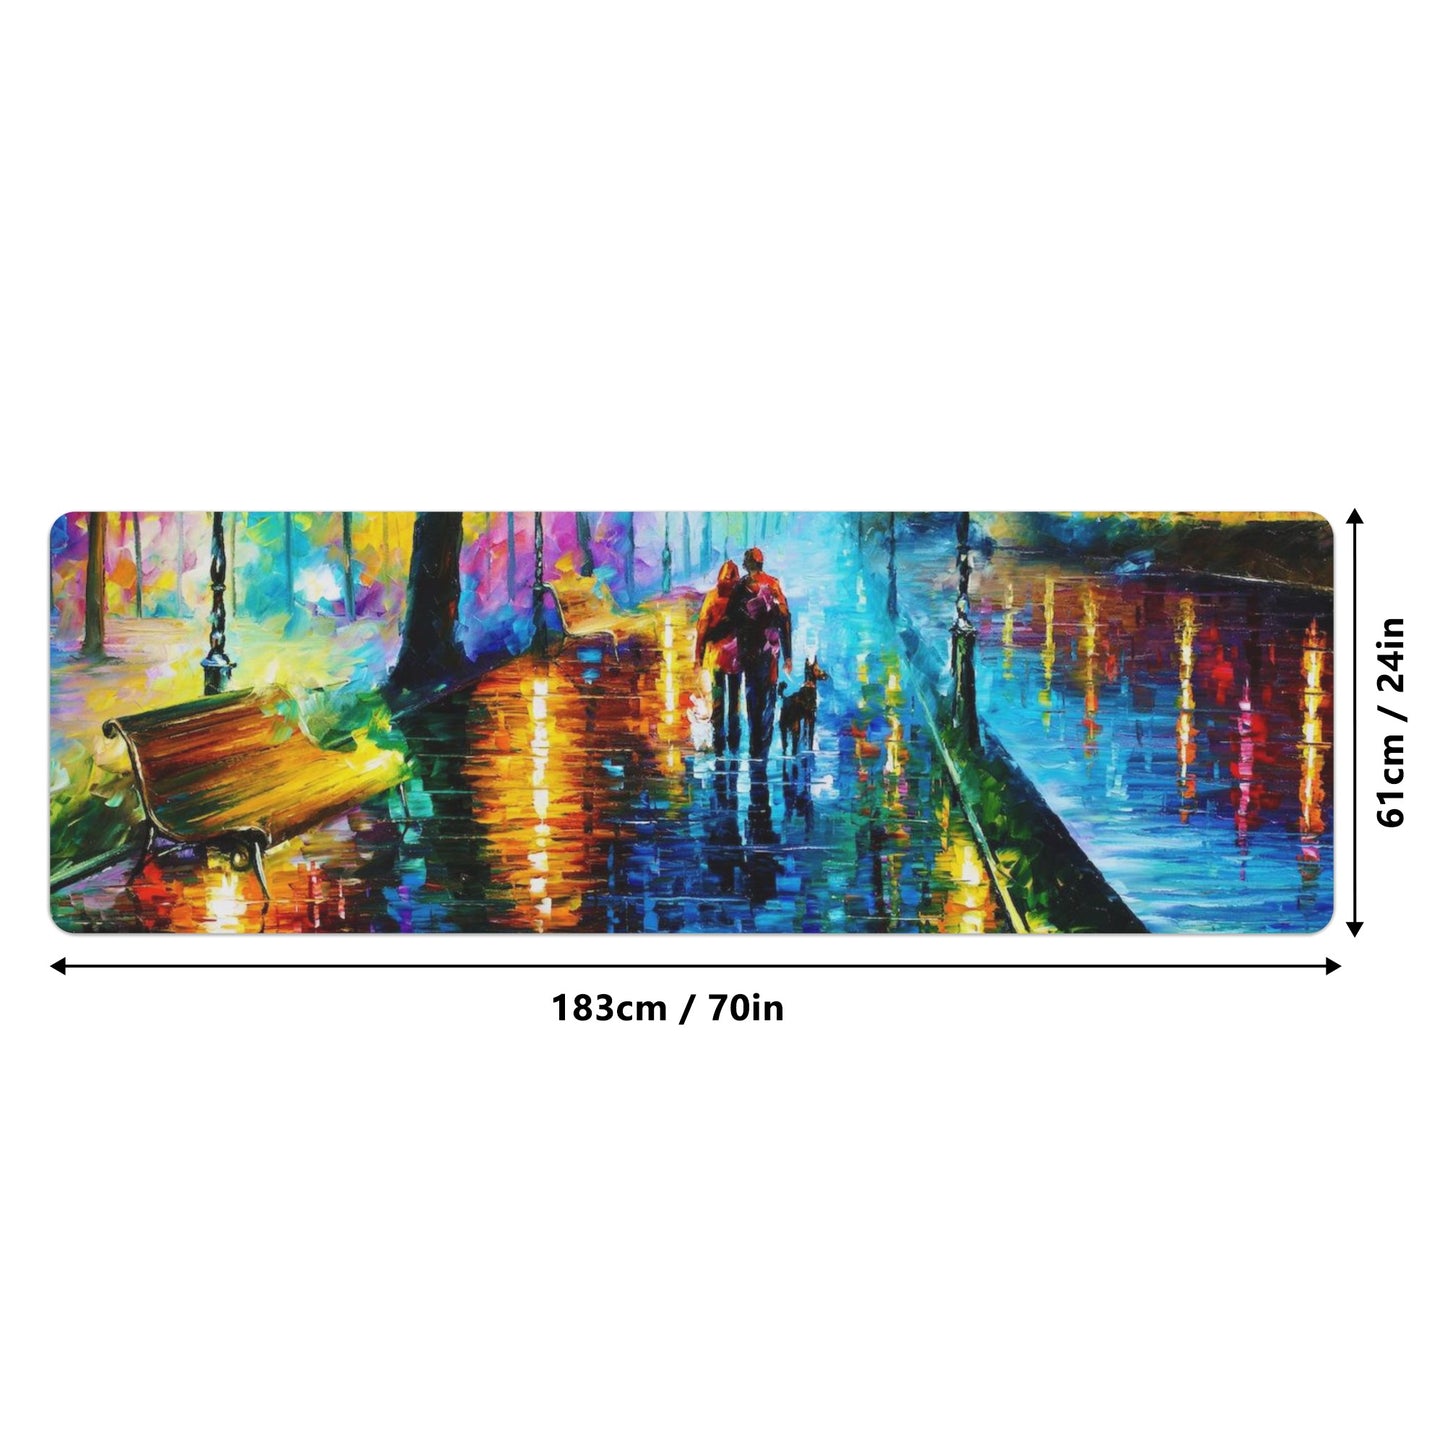 Rubber Yoga Mat Afremov MELODY OF THE NIGHT